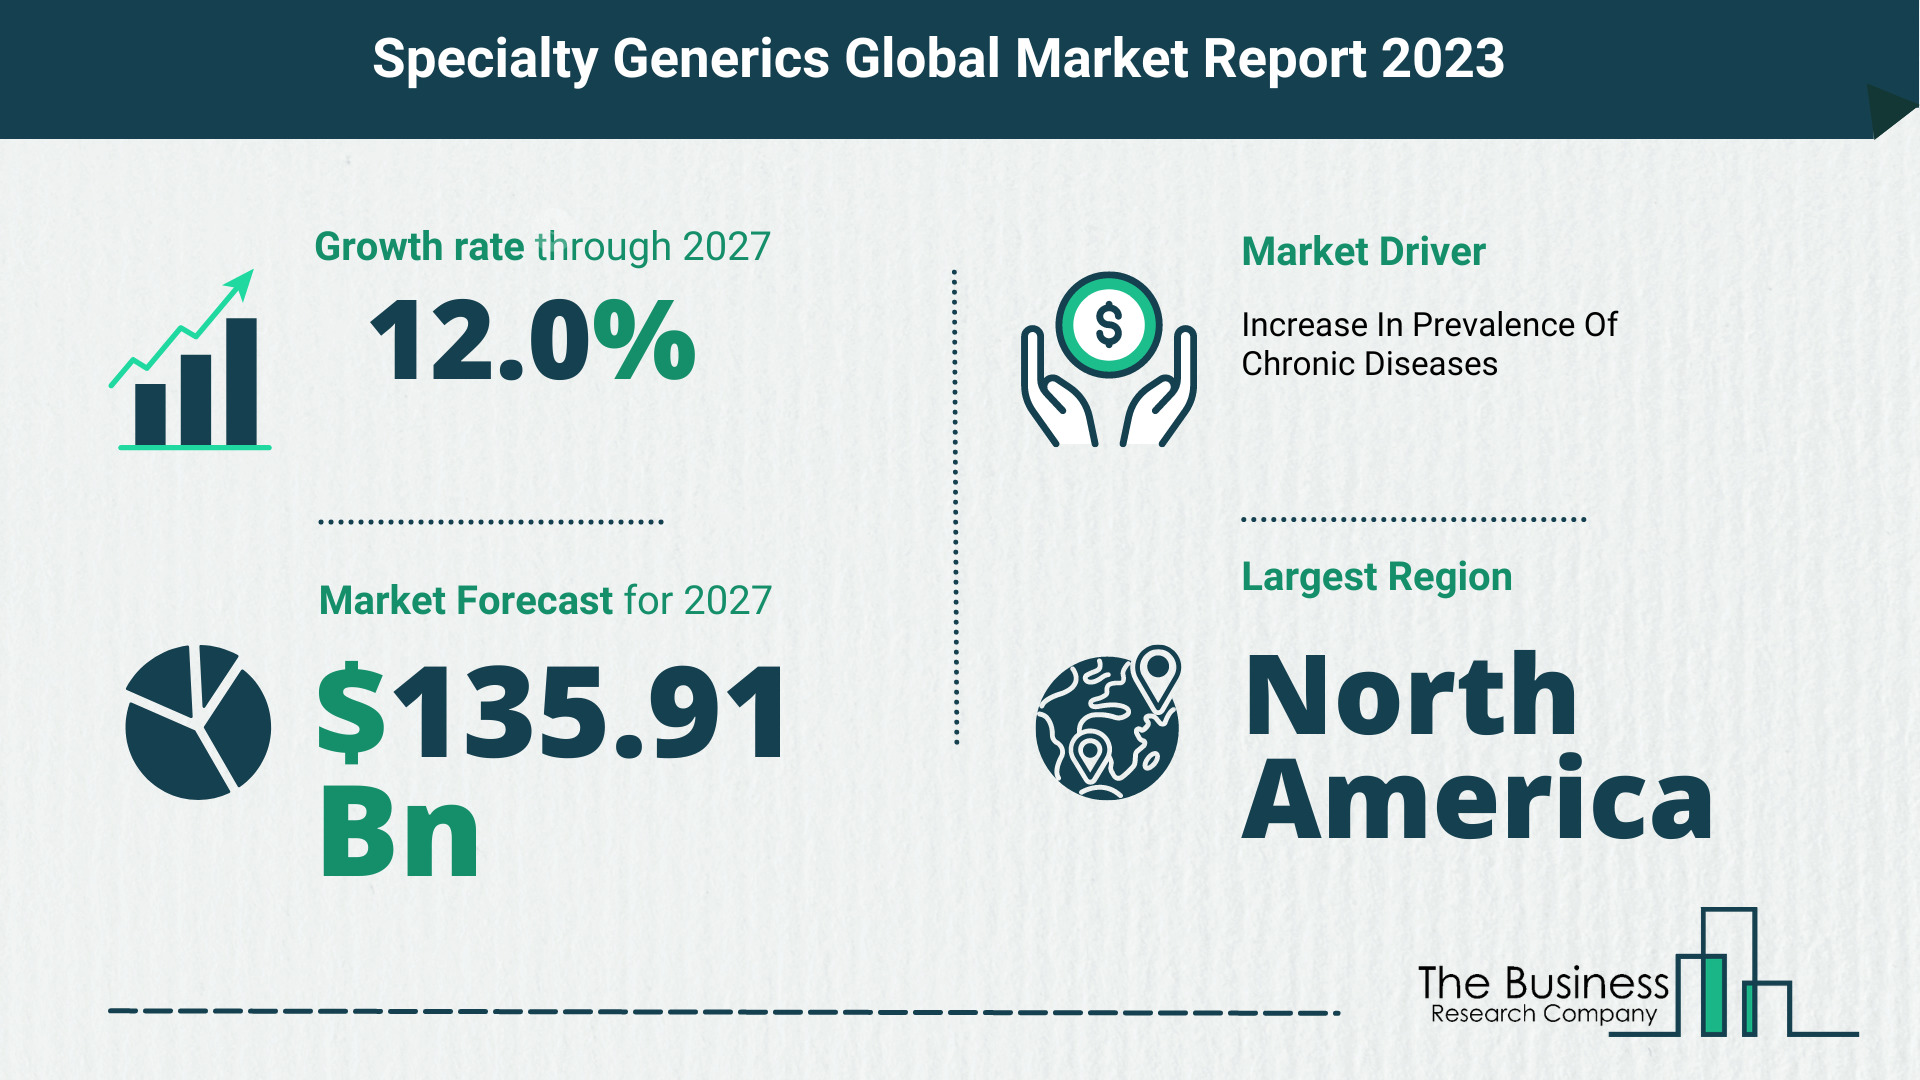 What Will The Specialty Generics Market Look Like In 2023?